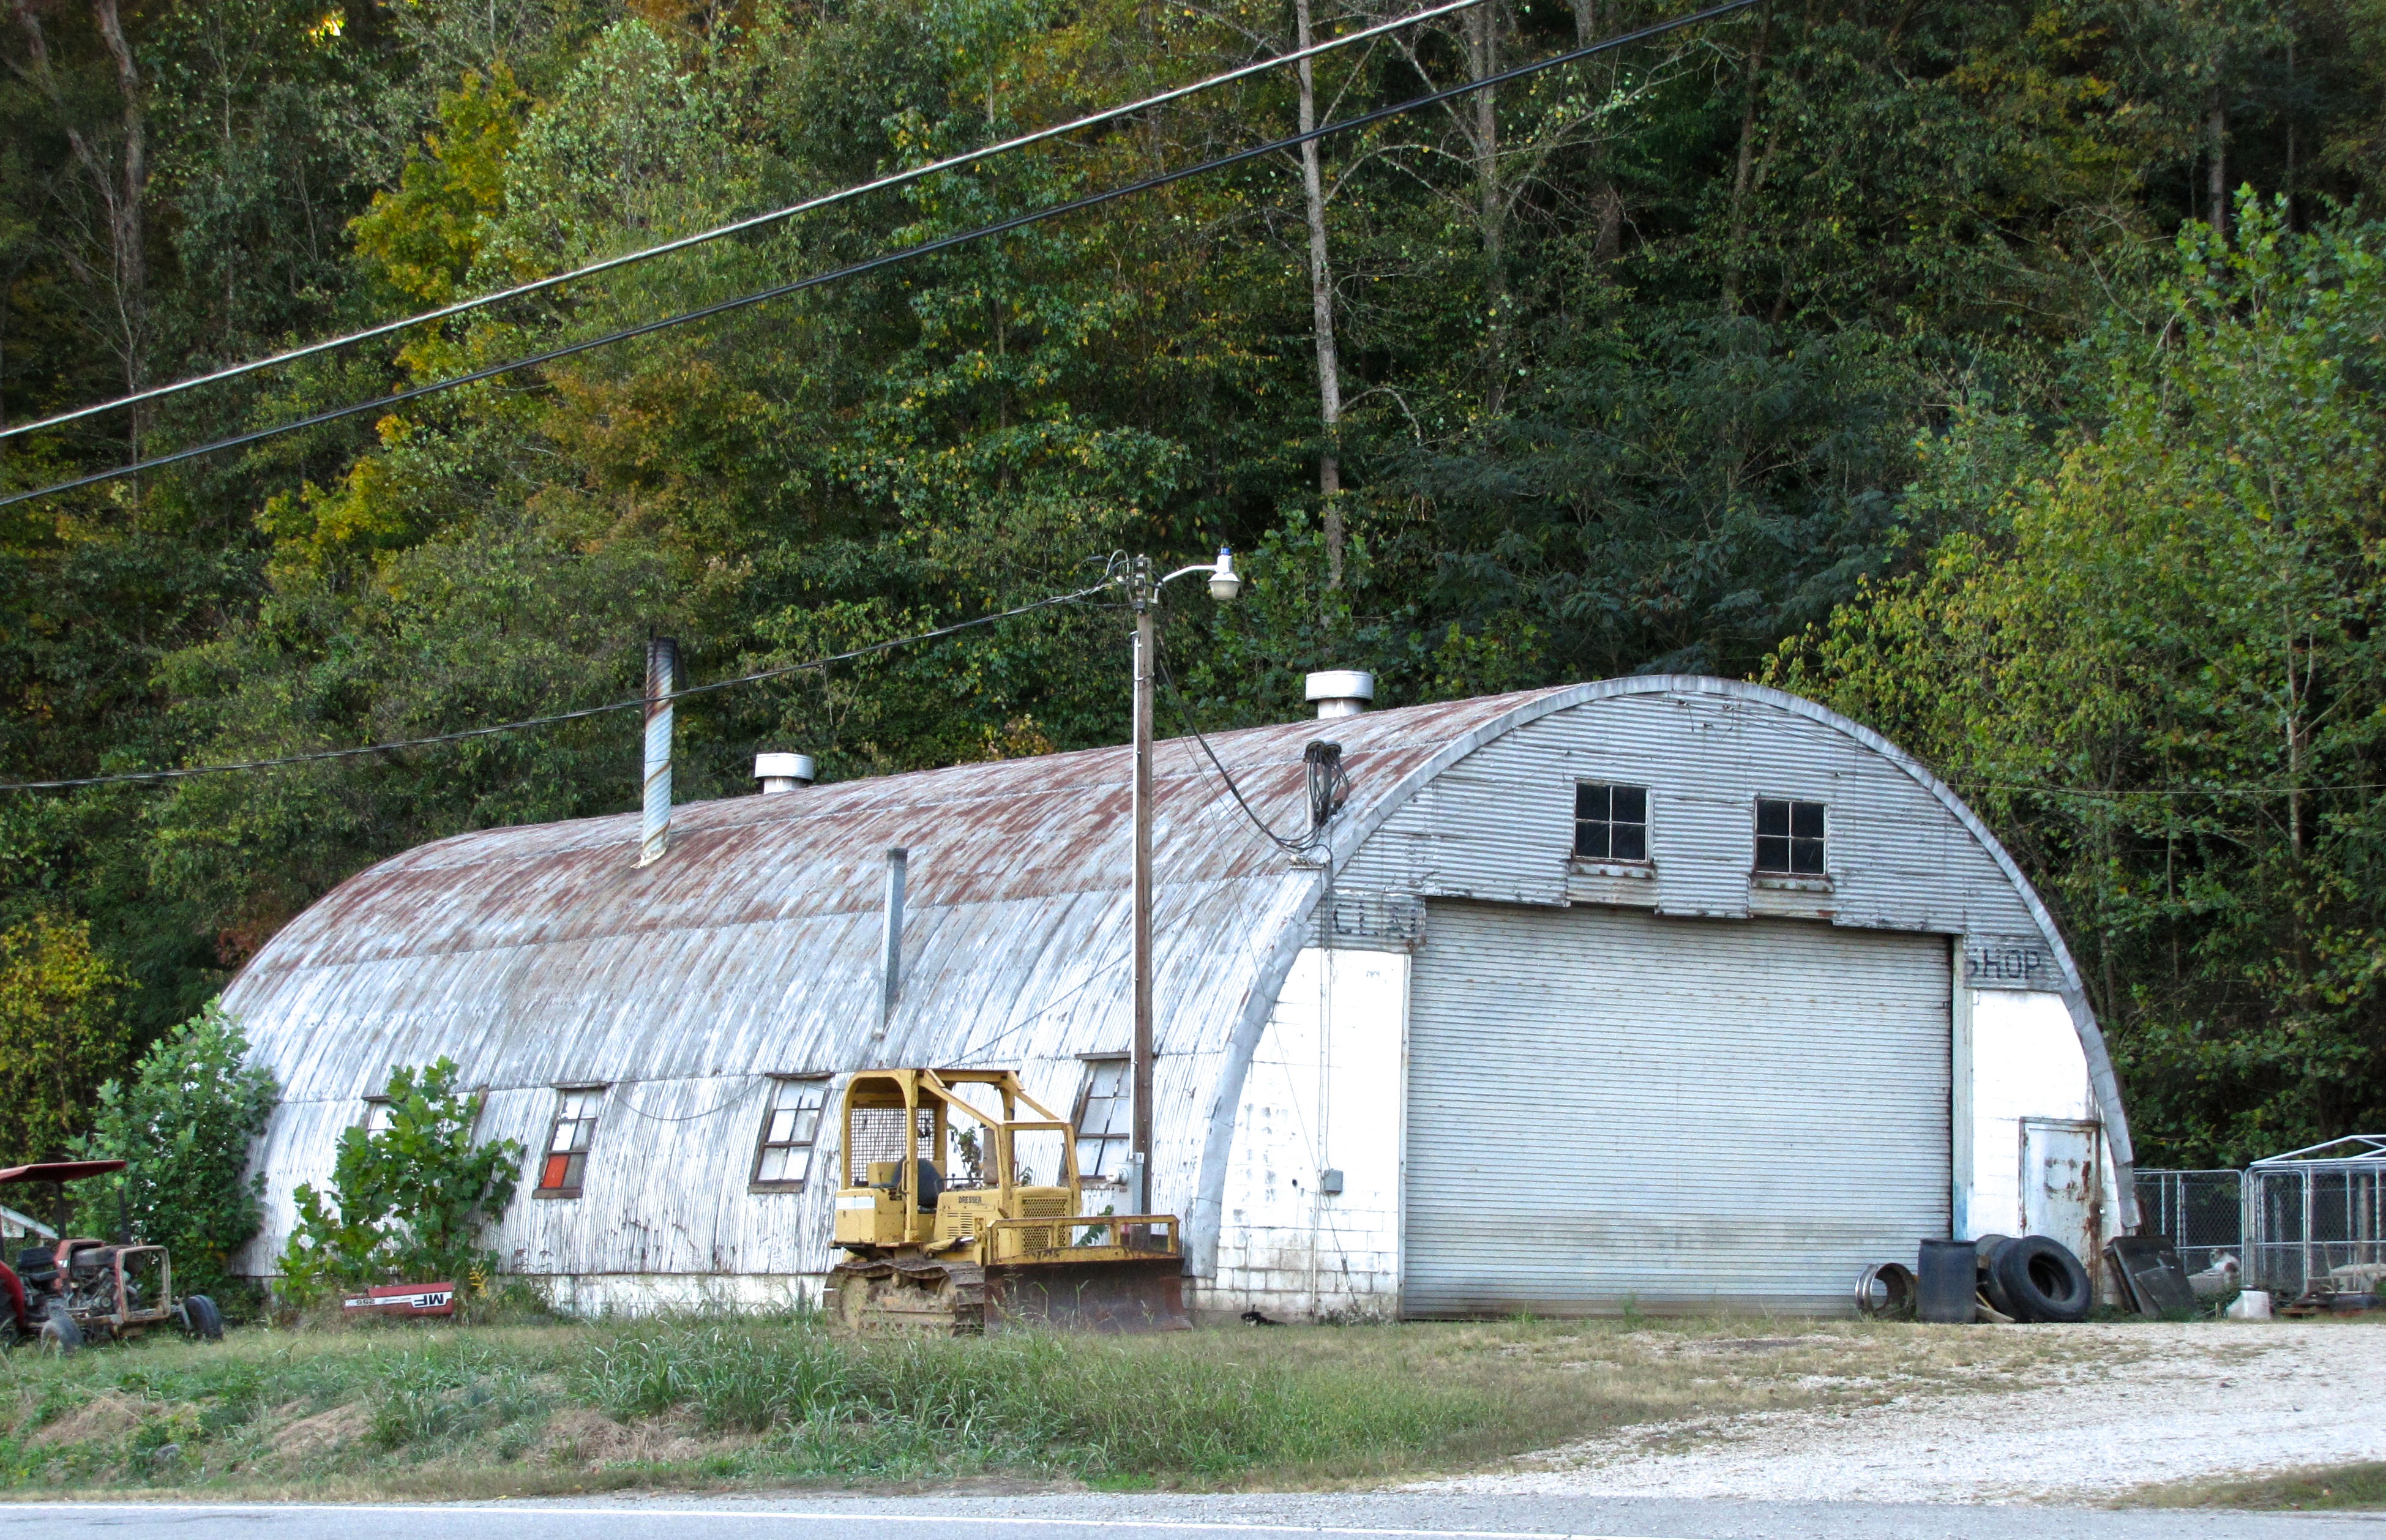 quonset hut in Moundsville, WV